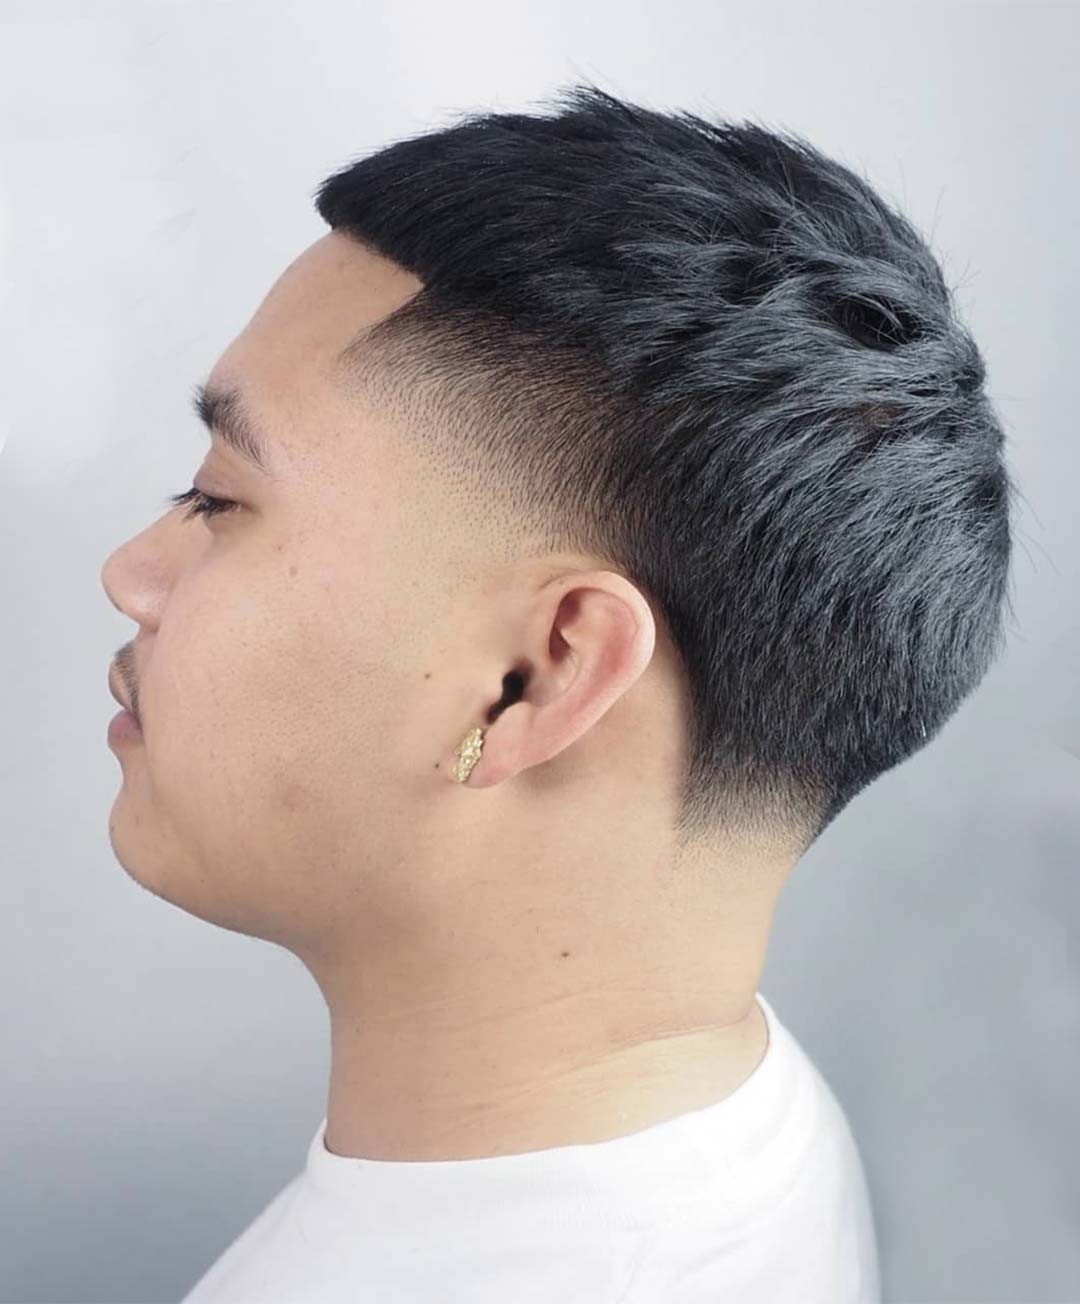 Taper Faded Side with Short Top